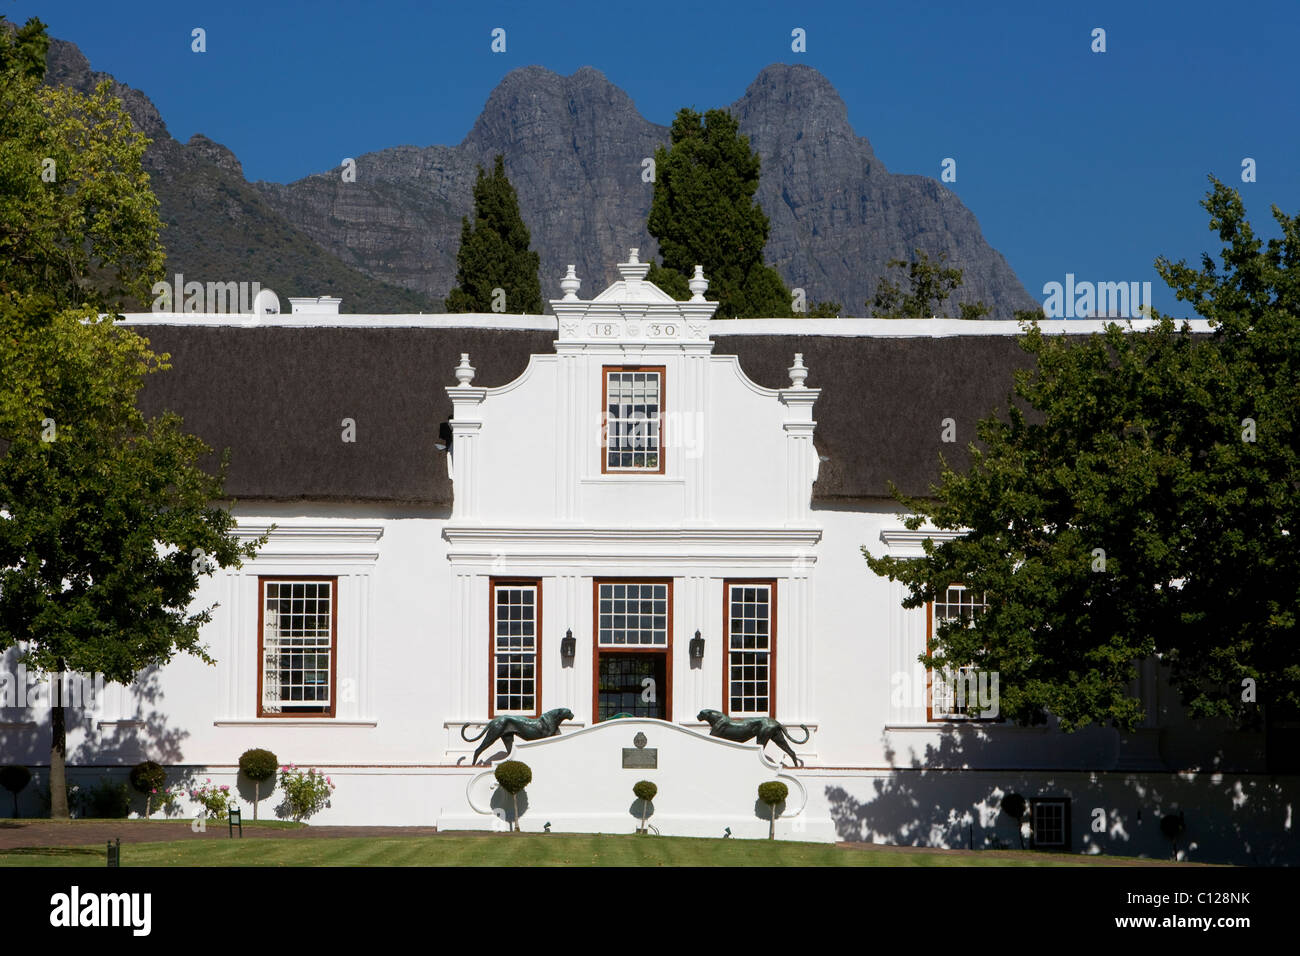 Lanzerac luxury hotel, country house in Cape-Dutch style, Stellenbosch, Winelands, Cape Town, Western Cape, South Africa, Africa Stock Photo